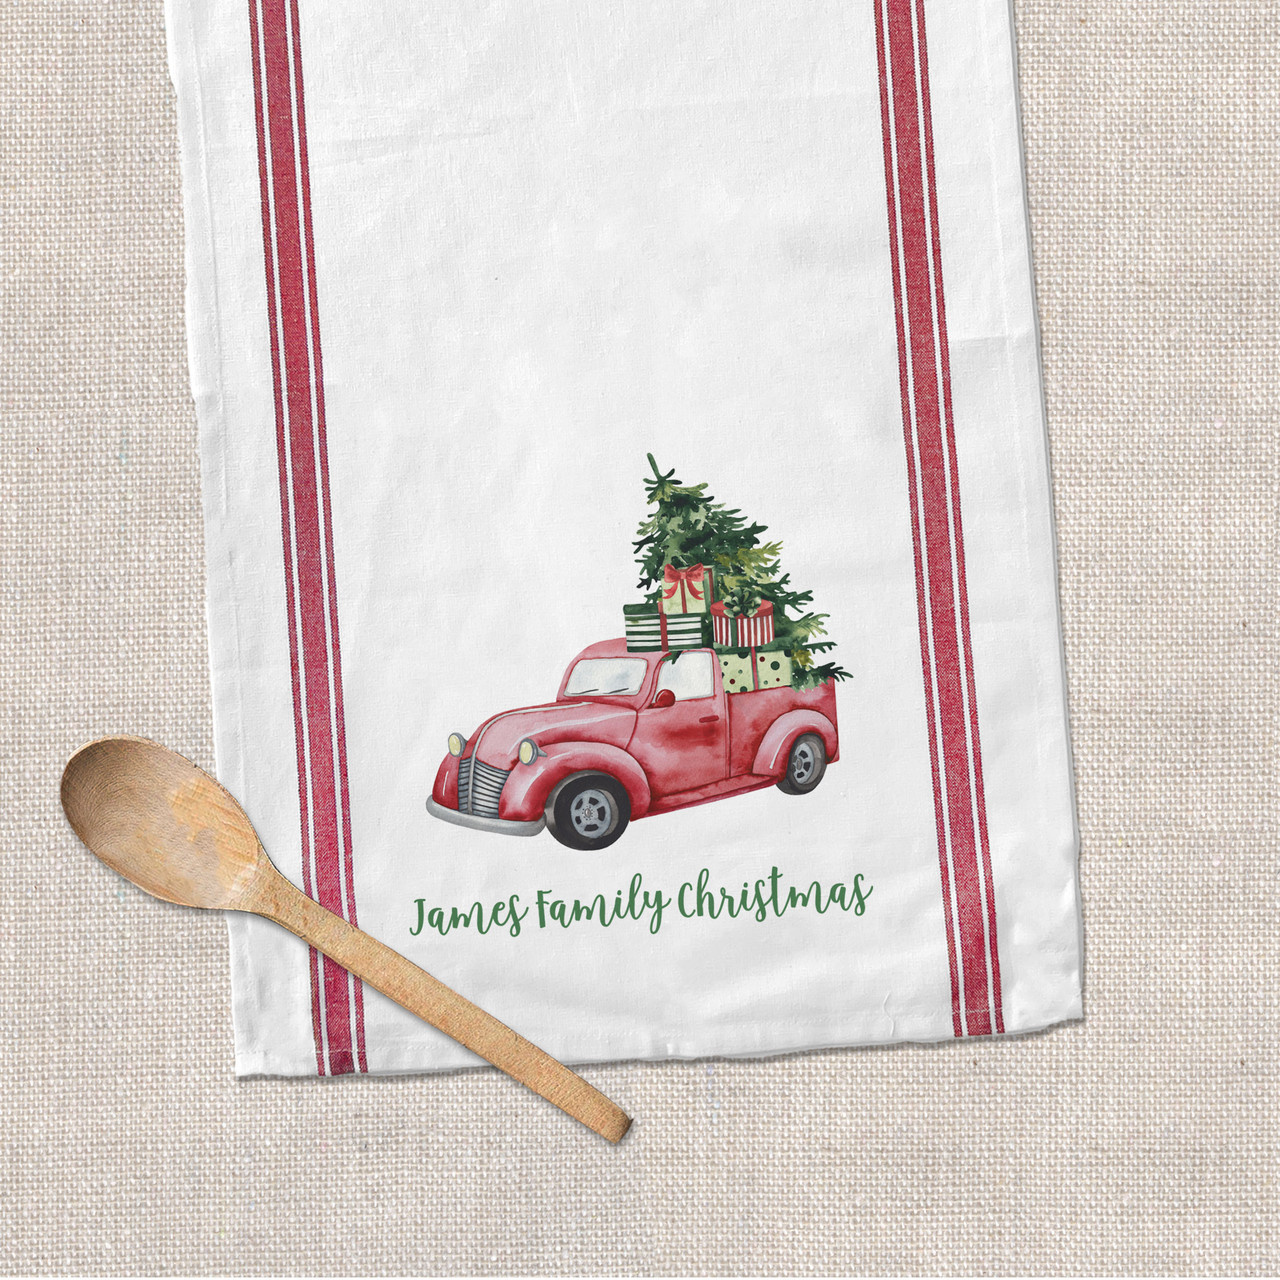 Funny Kitchen Towels - Dish Towels - Kitchen Decor - Hostess Gifts